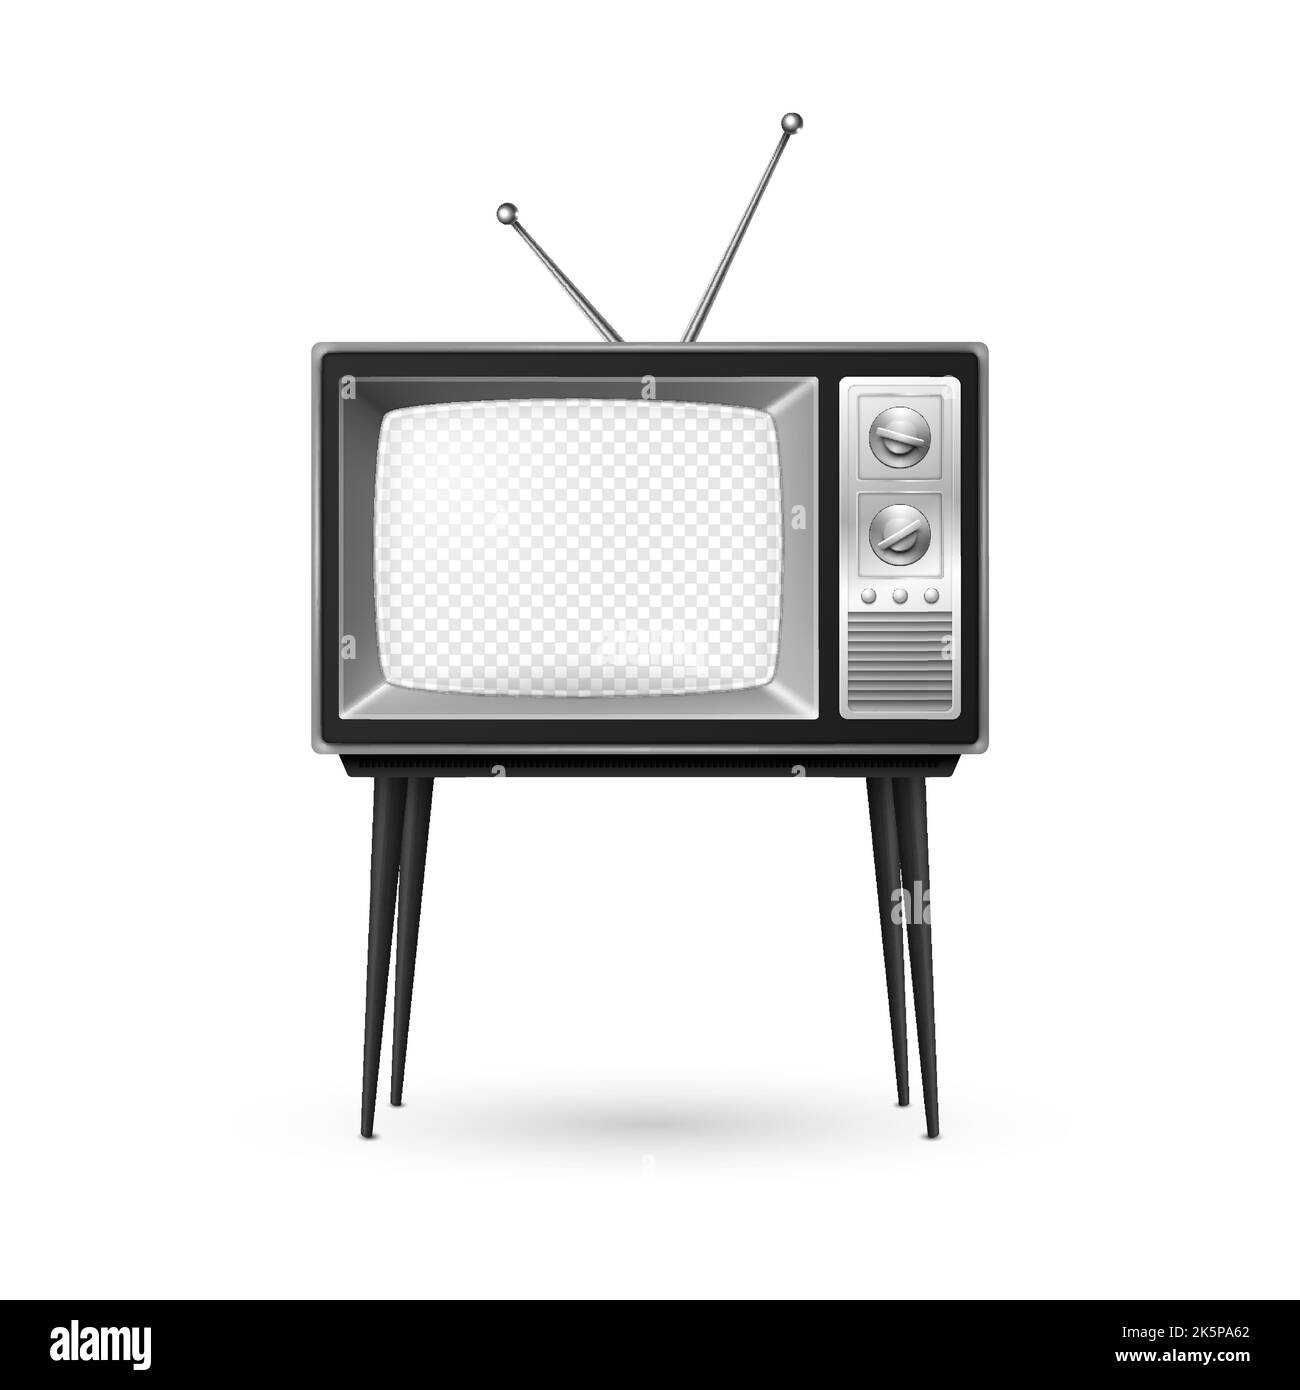 Vector 3d Realistic Retro TV Receiver with Transparent Screen and Antenna Isolated on White Background. Home Interior Design Concept. Vintage TV Set Stock Vector